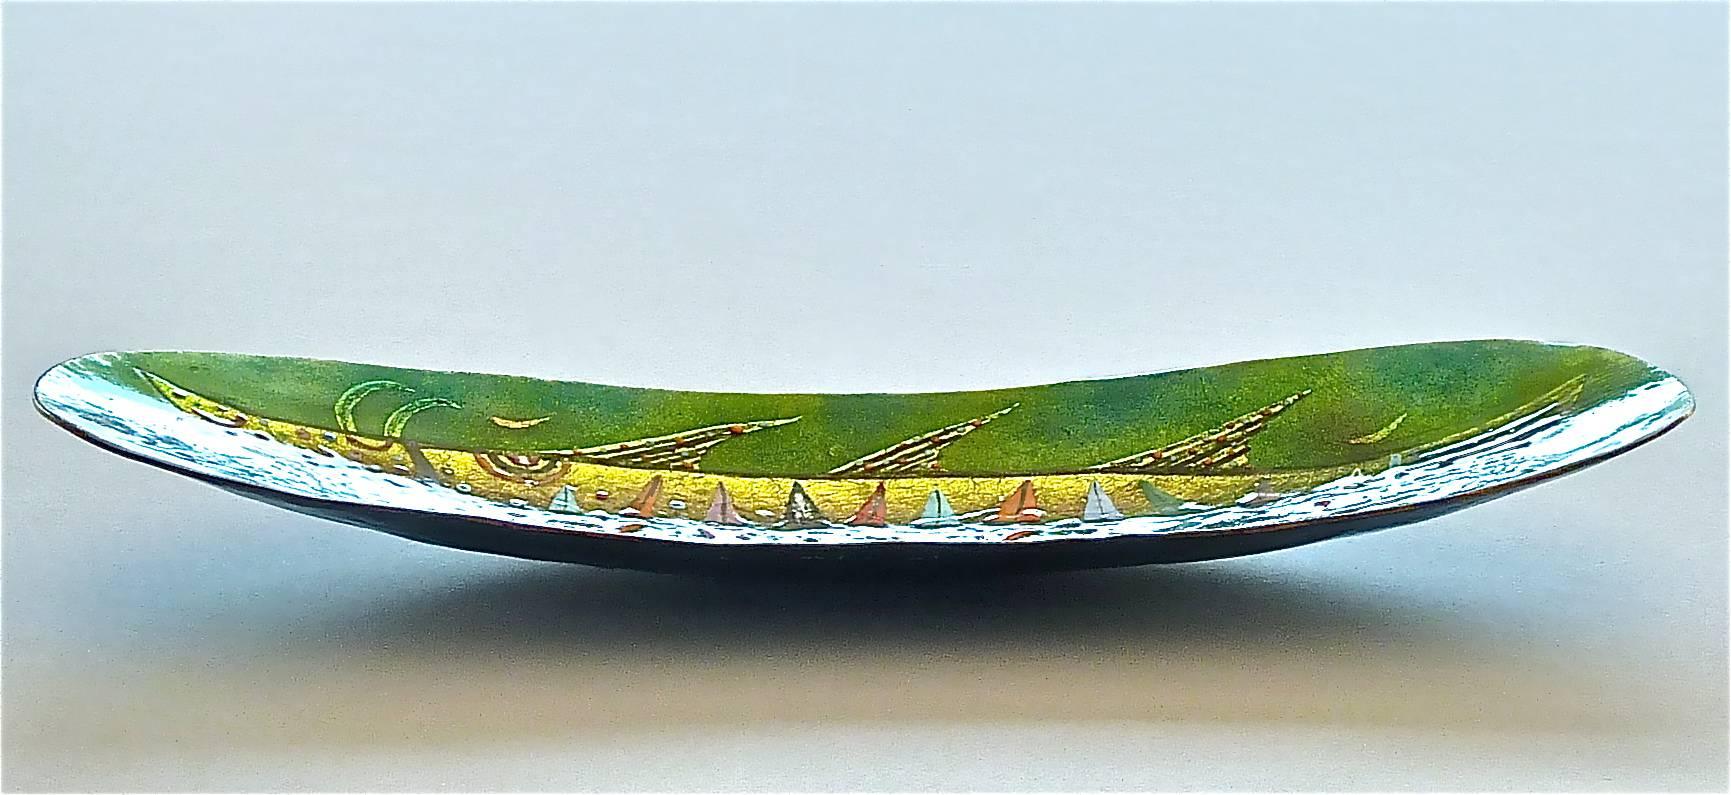 Mid-20th Century Large Green Colorful Enamel on Copper Fish Bowl De Poli or circle, Italy, 1950s